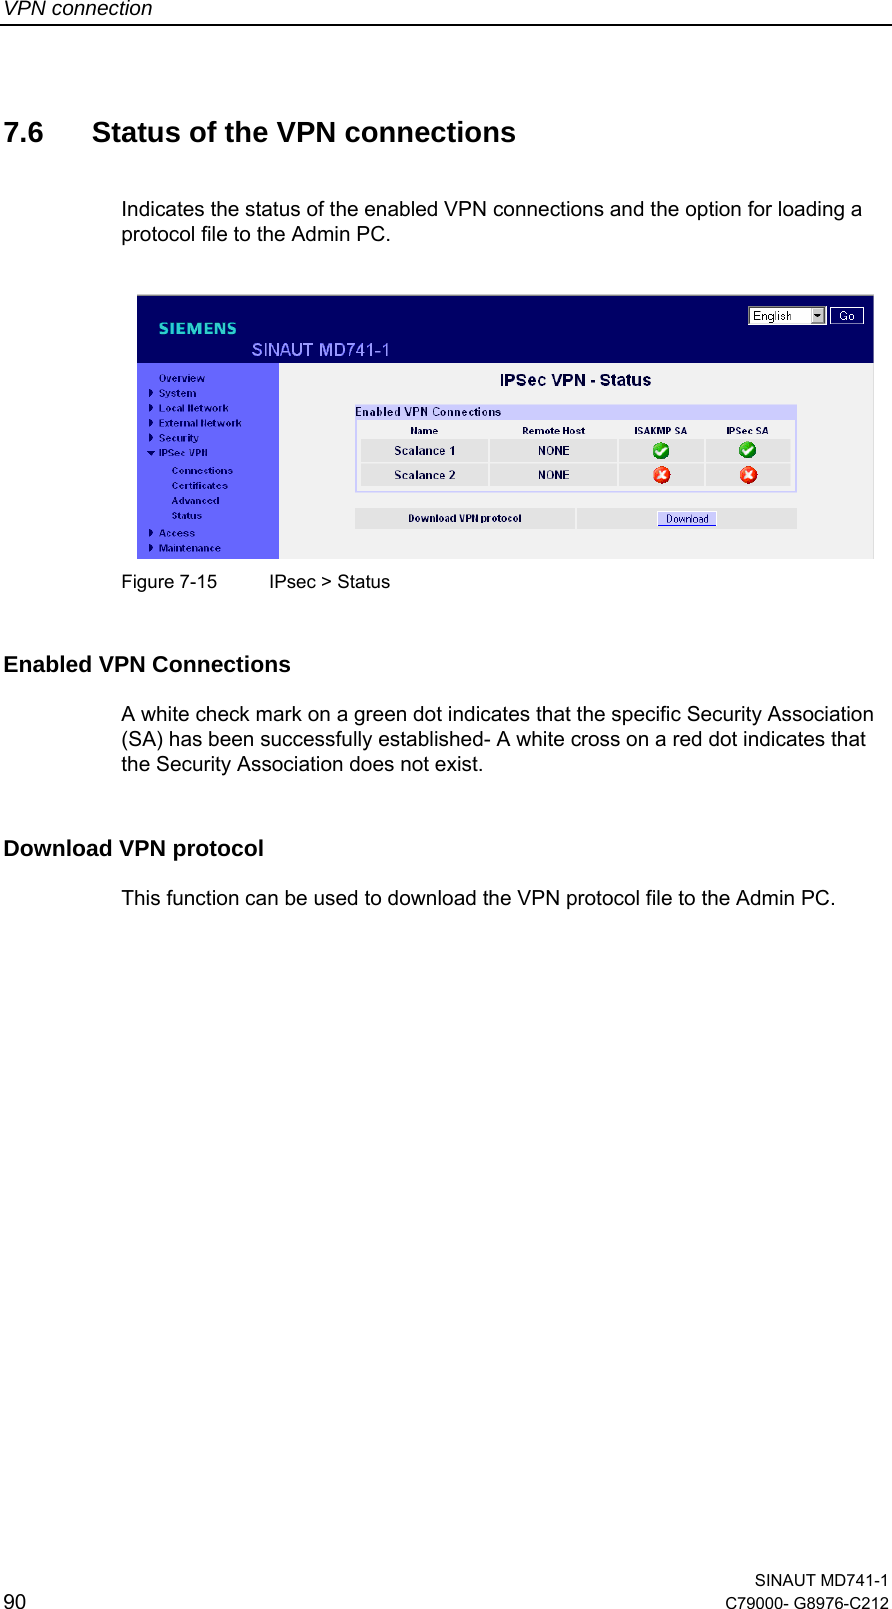 VPN connection  SINAUT MD741-1 90  C79000- G8976-C212   7.6  Status of the VPN connections  Indicates the status of the enabled VPN connections and the option for loading a protocol file to the Admin PC.     Figure 7-15  IPsec &gt; Status Enabled VPN Connections  A white check mark on a green dot indicates that the specific Security Association (SA) has been successfully established- A white cross on a red dot indicates that the Security Association does not exist. Download VPN protocol  This function can be used to download the VPN protocol file to the Admin PC.  